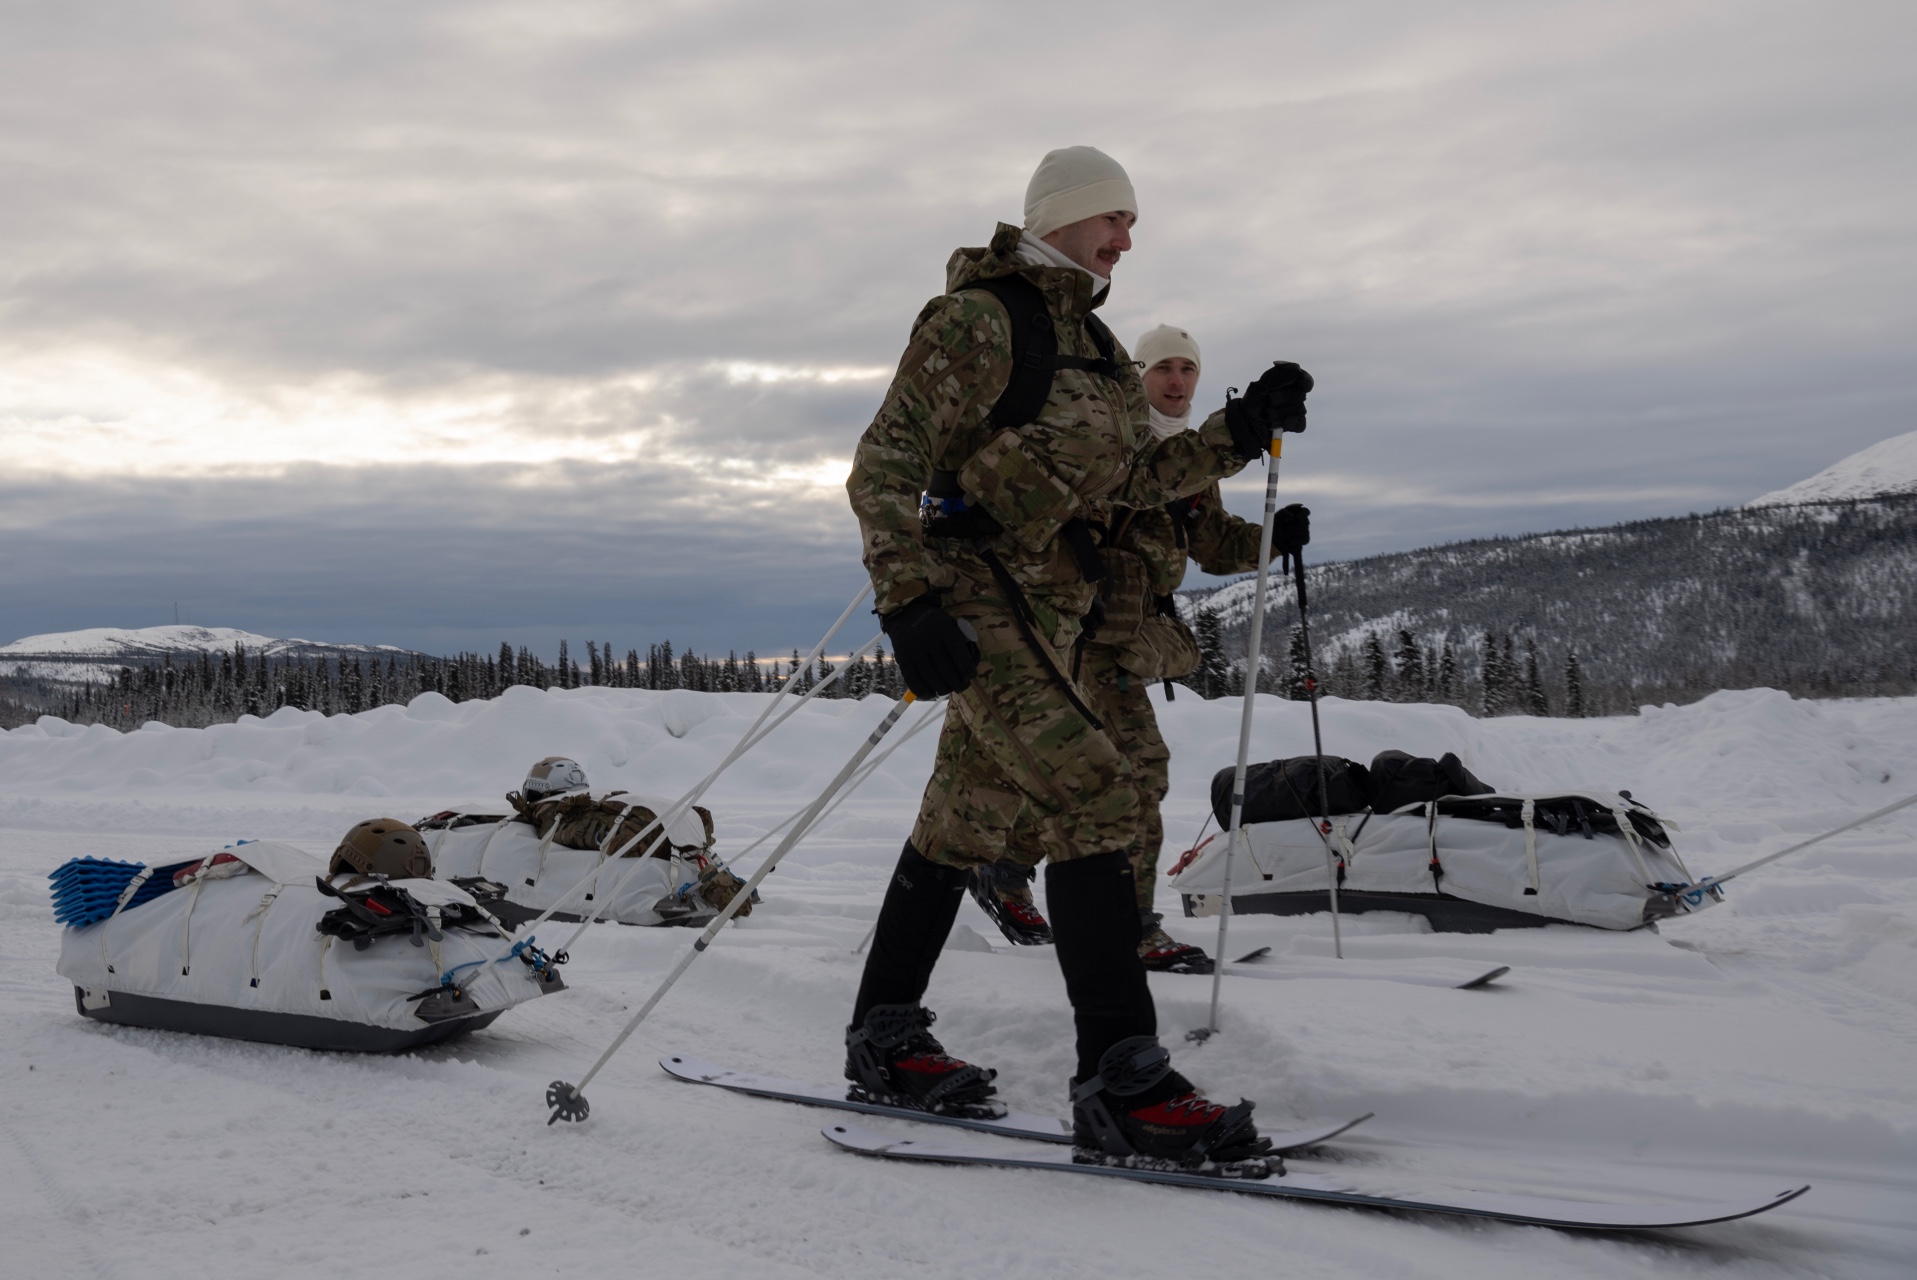 US special forces commence an overland cross country ski movement during Operation Agipen 2 at Paxson, Alask